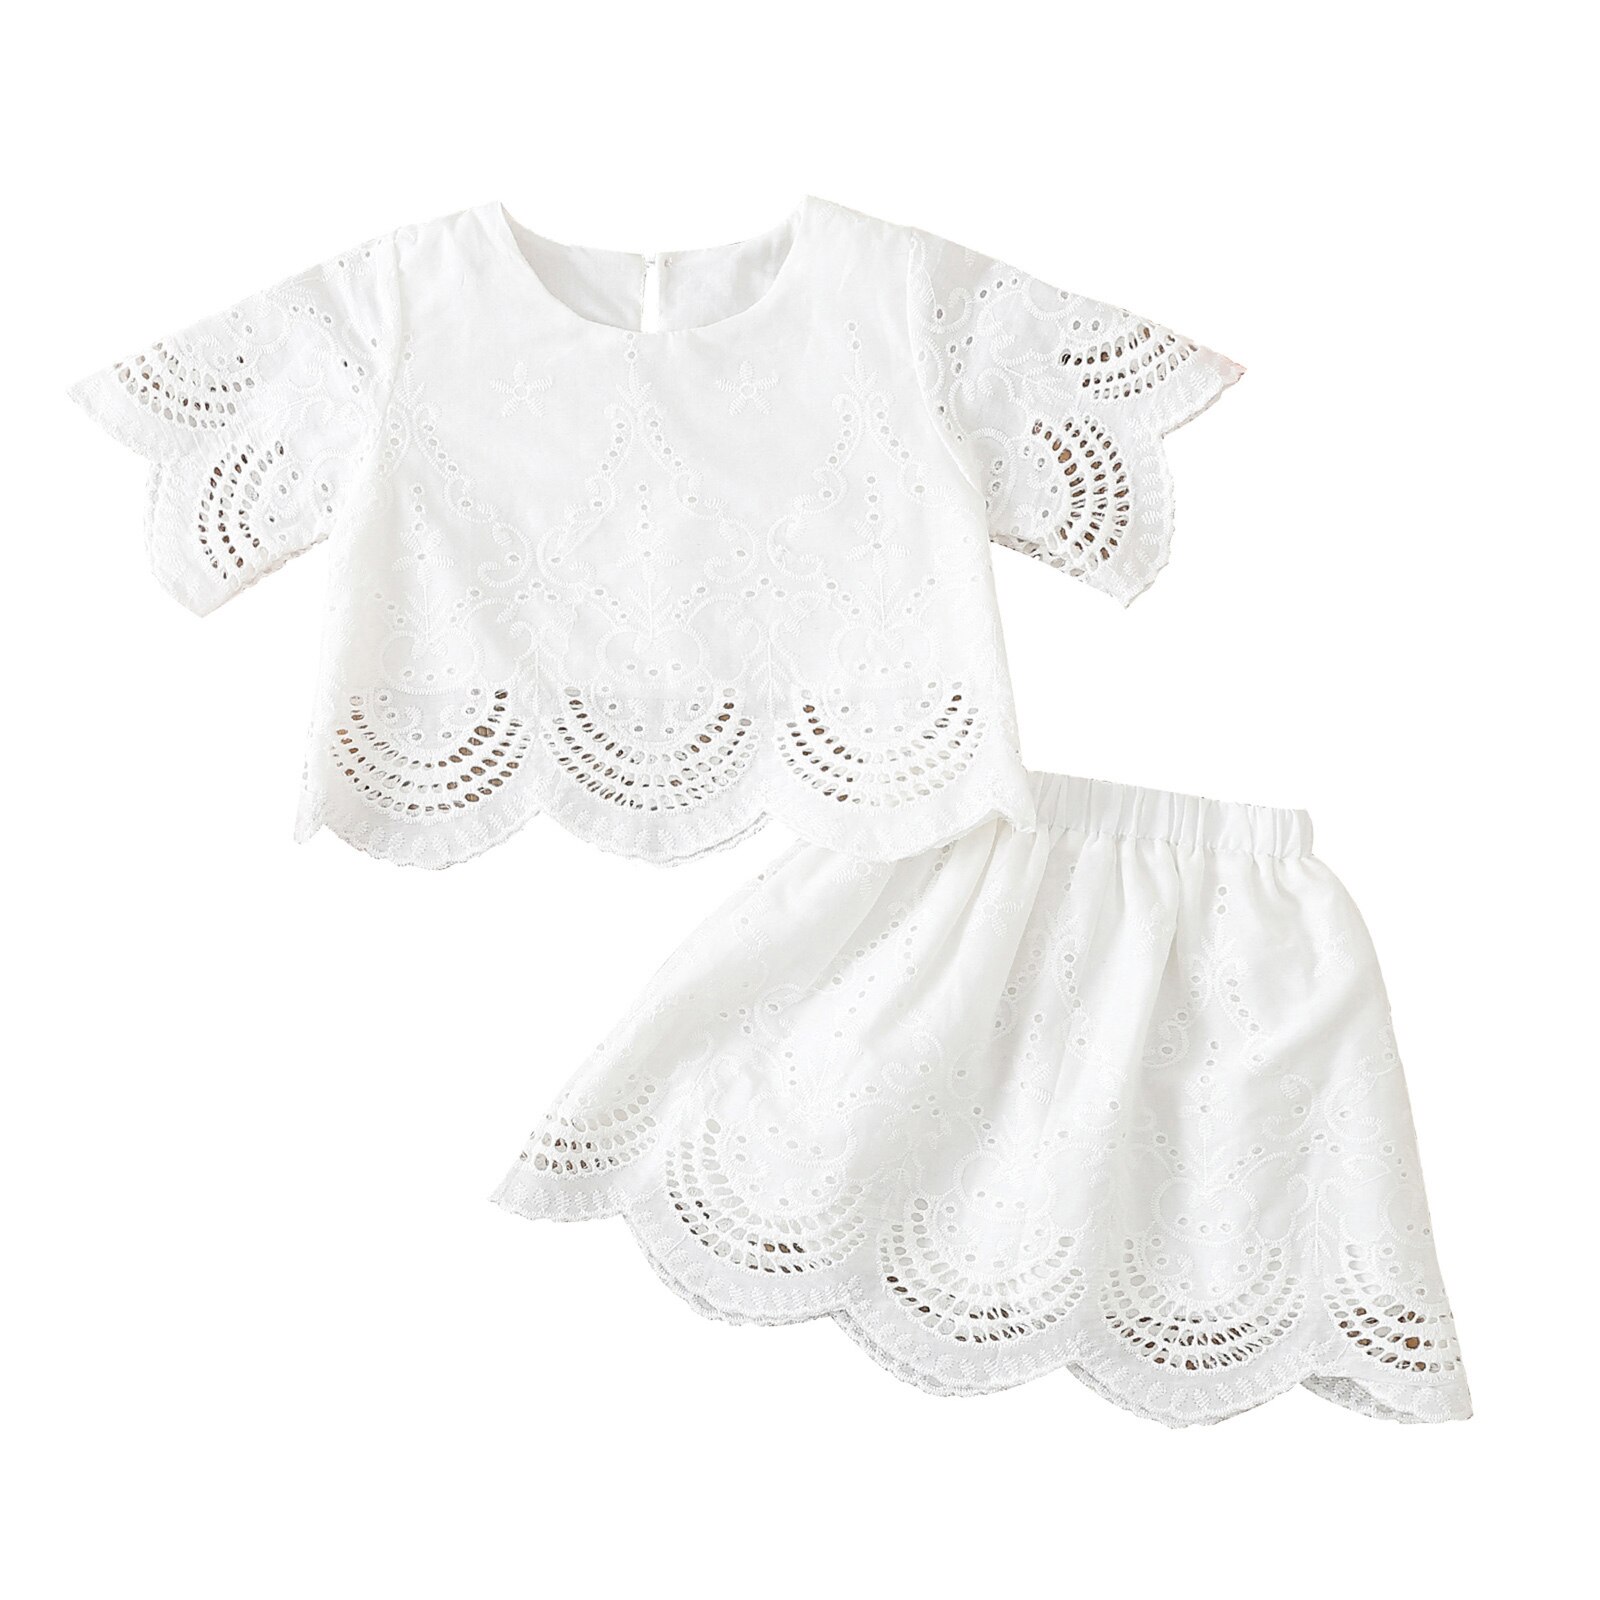 Ma-Baby-2-7Y-Toddler-Kids-Girls-Clothes-Set-Children-Outfits-White-Lace-T-shirt-Skirts-5